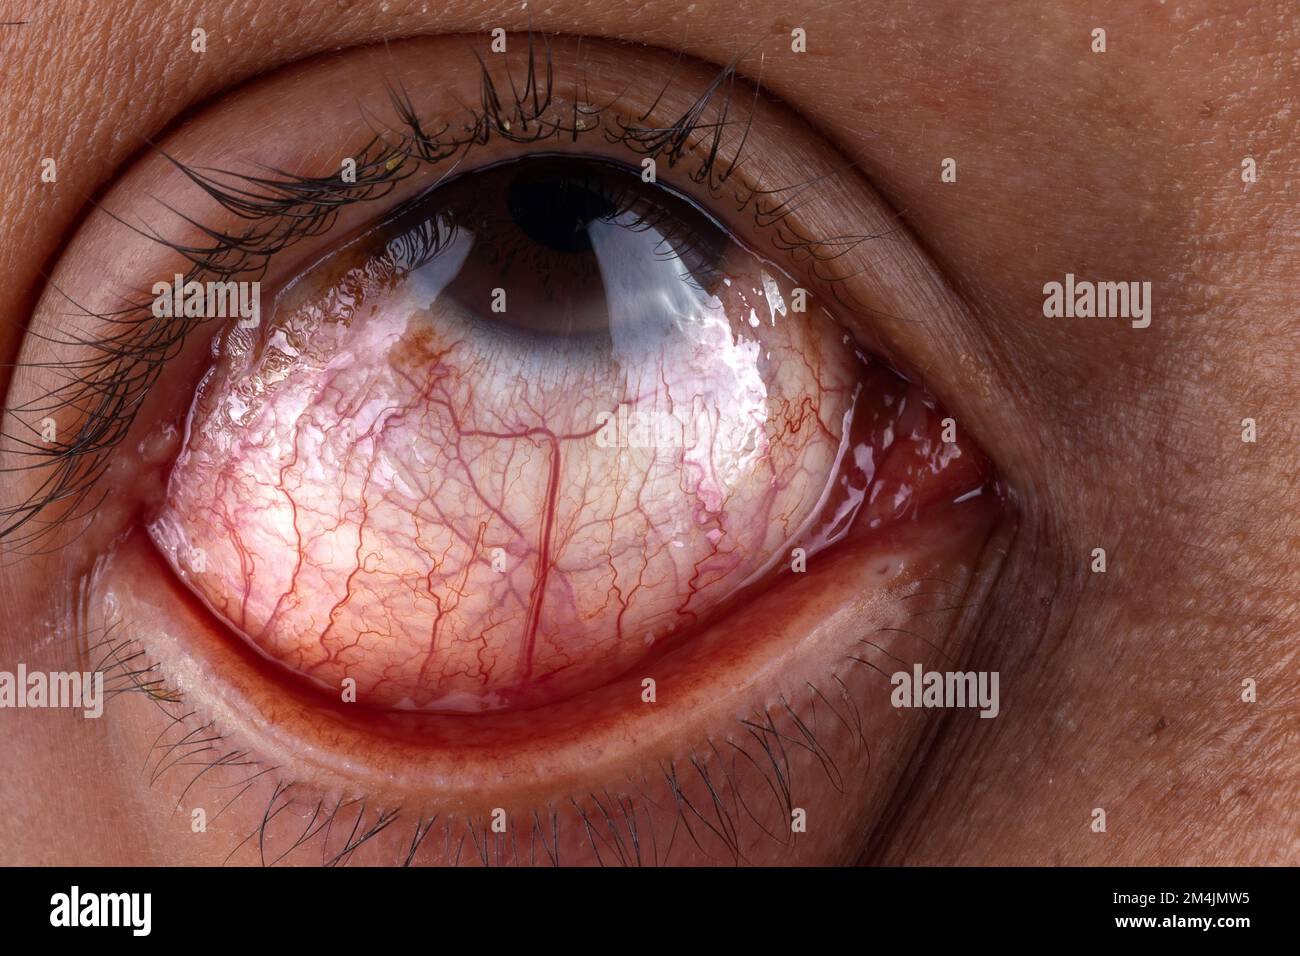 Human eye red, evident irritation of the capillaries due to conjunctivitis and eyelid herpes Stock Photo